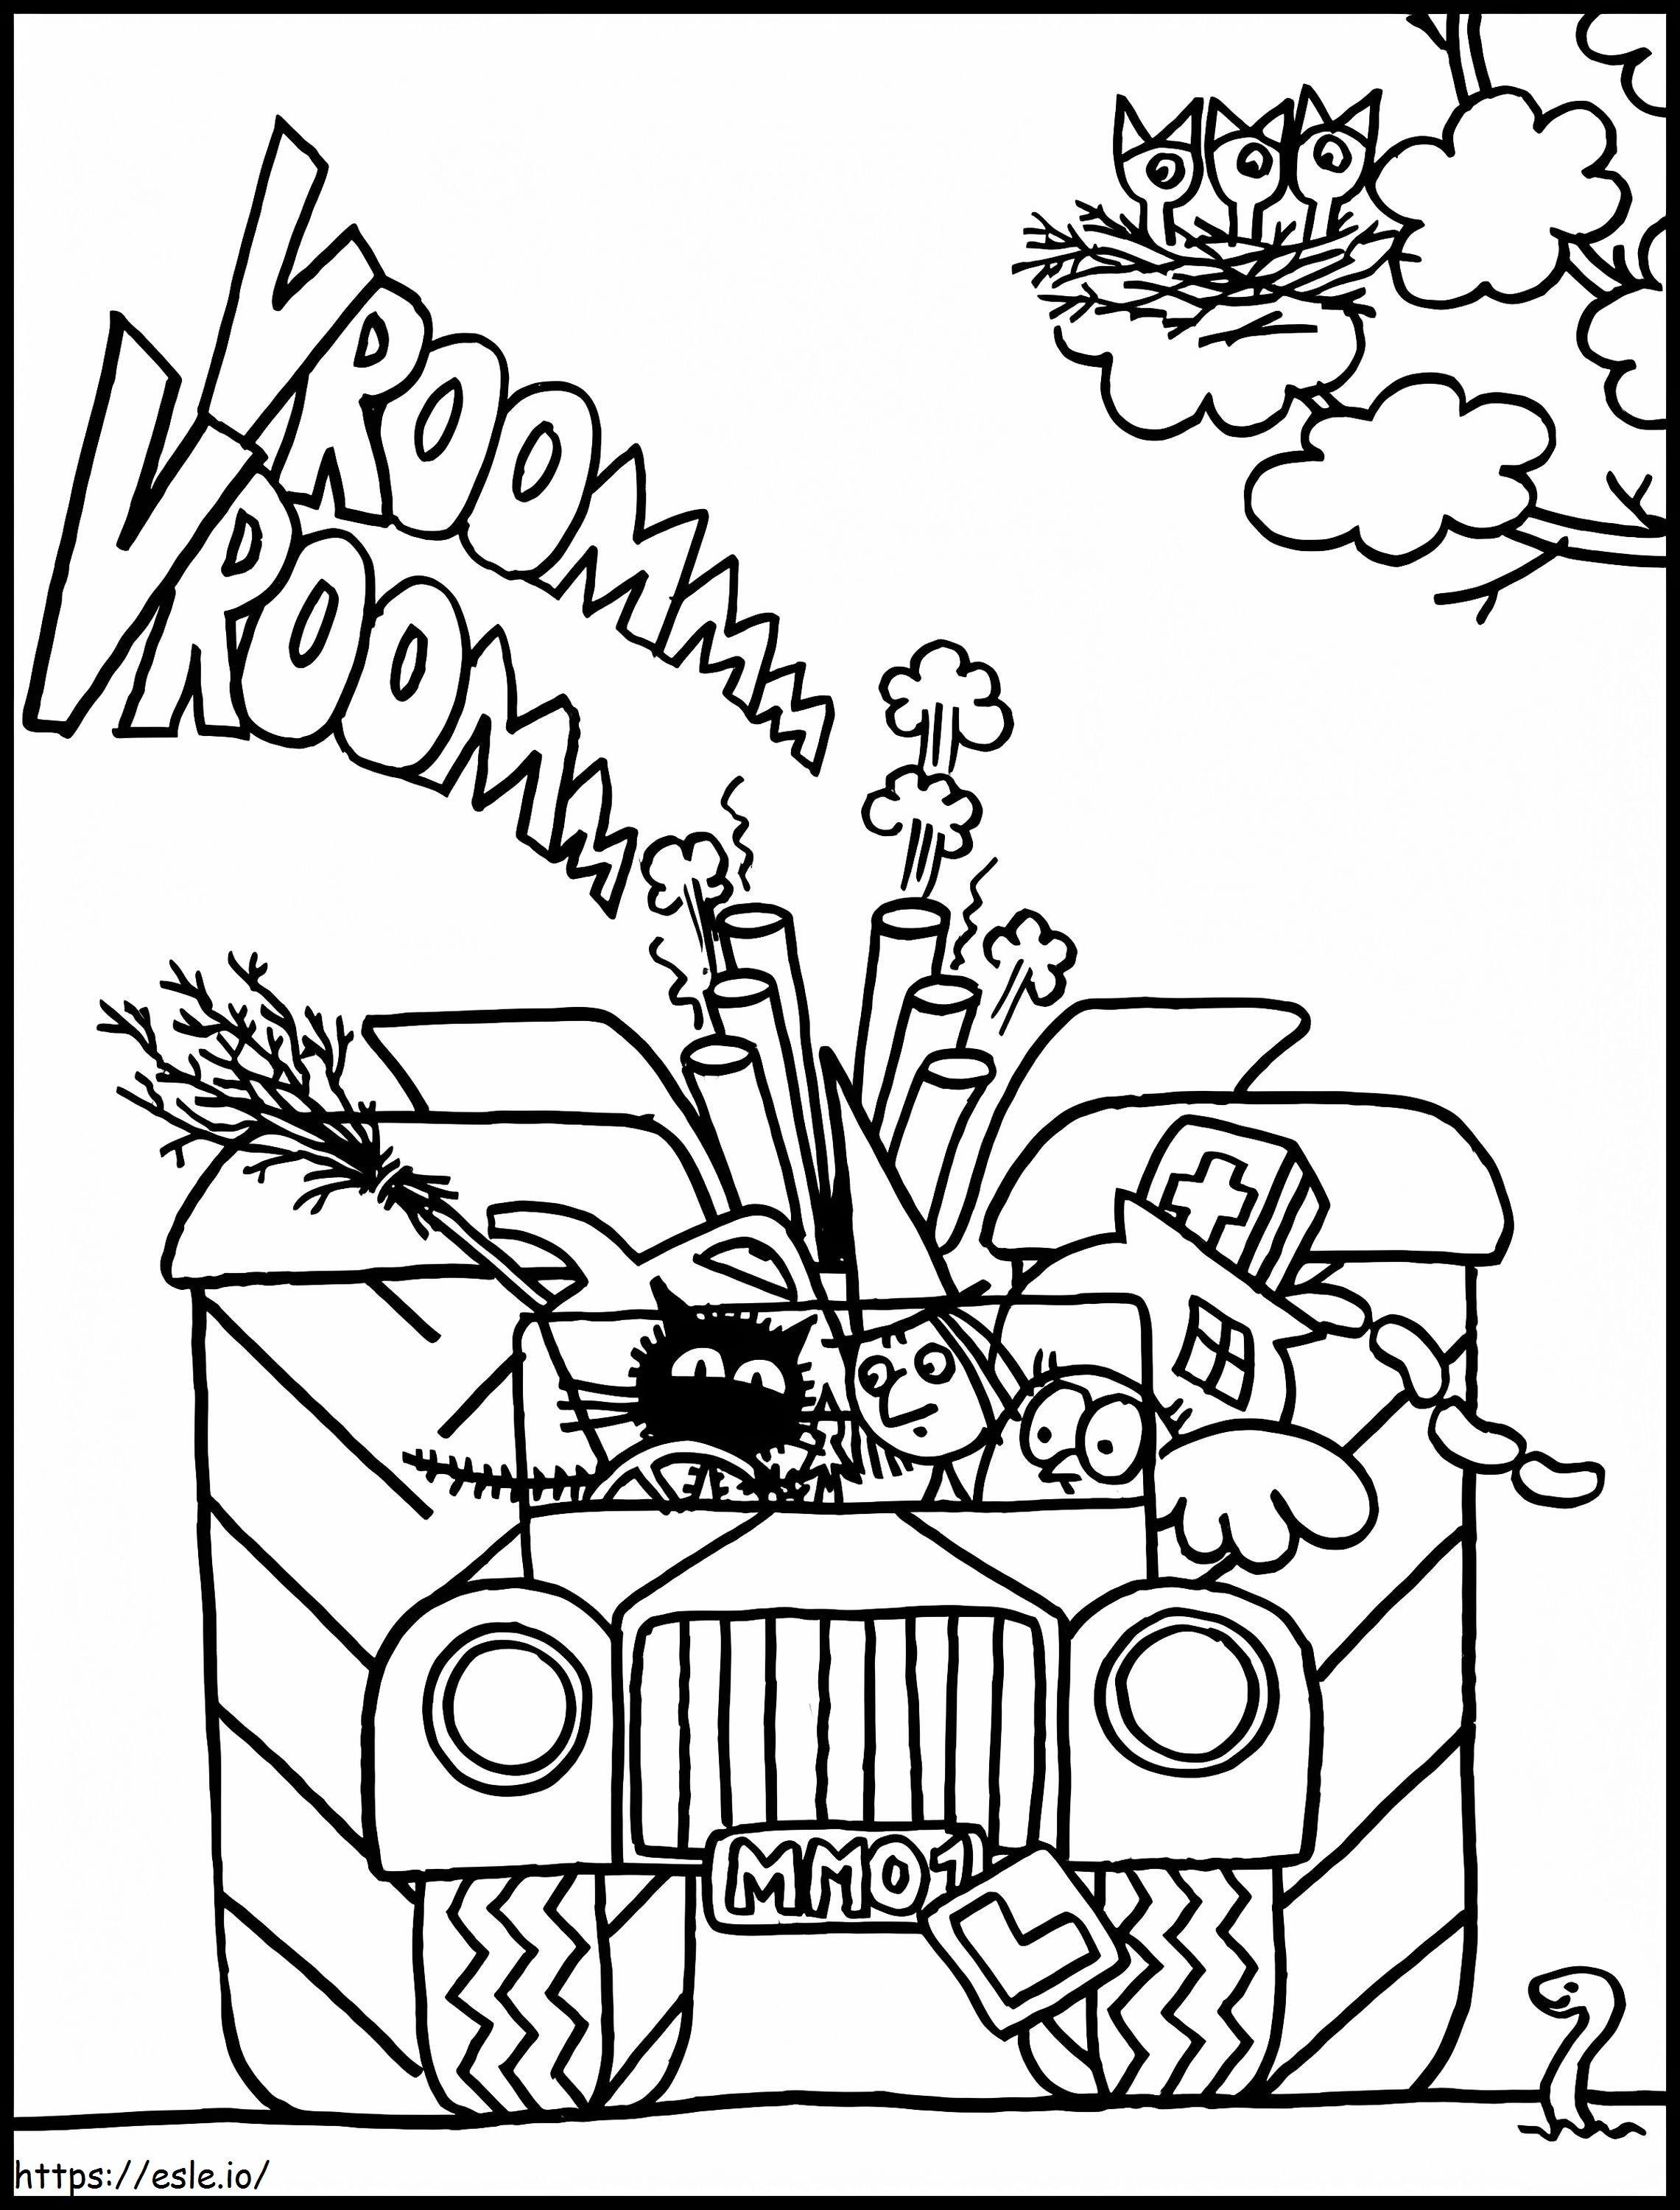 Me And Mog 4 coloring page